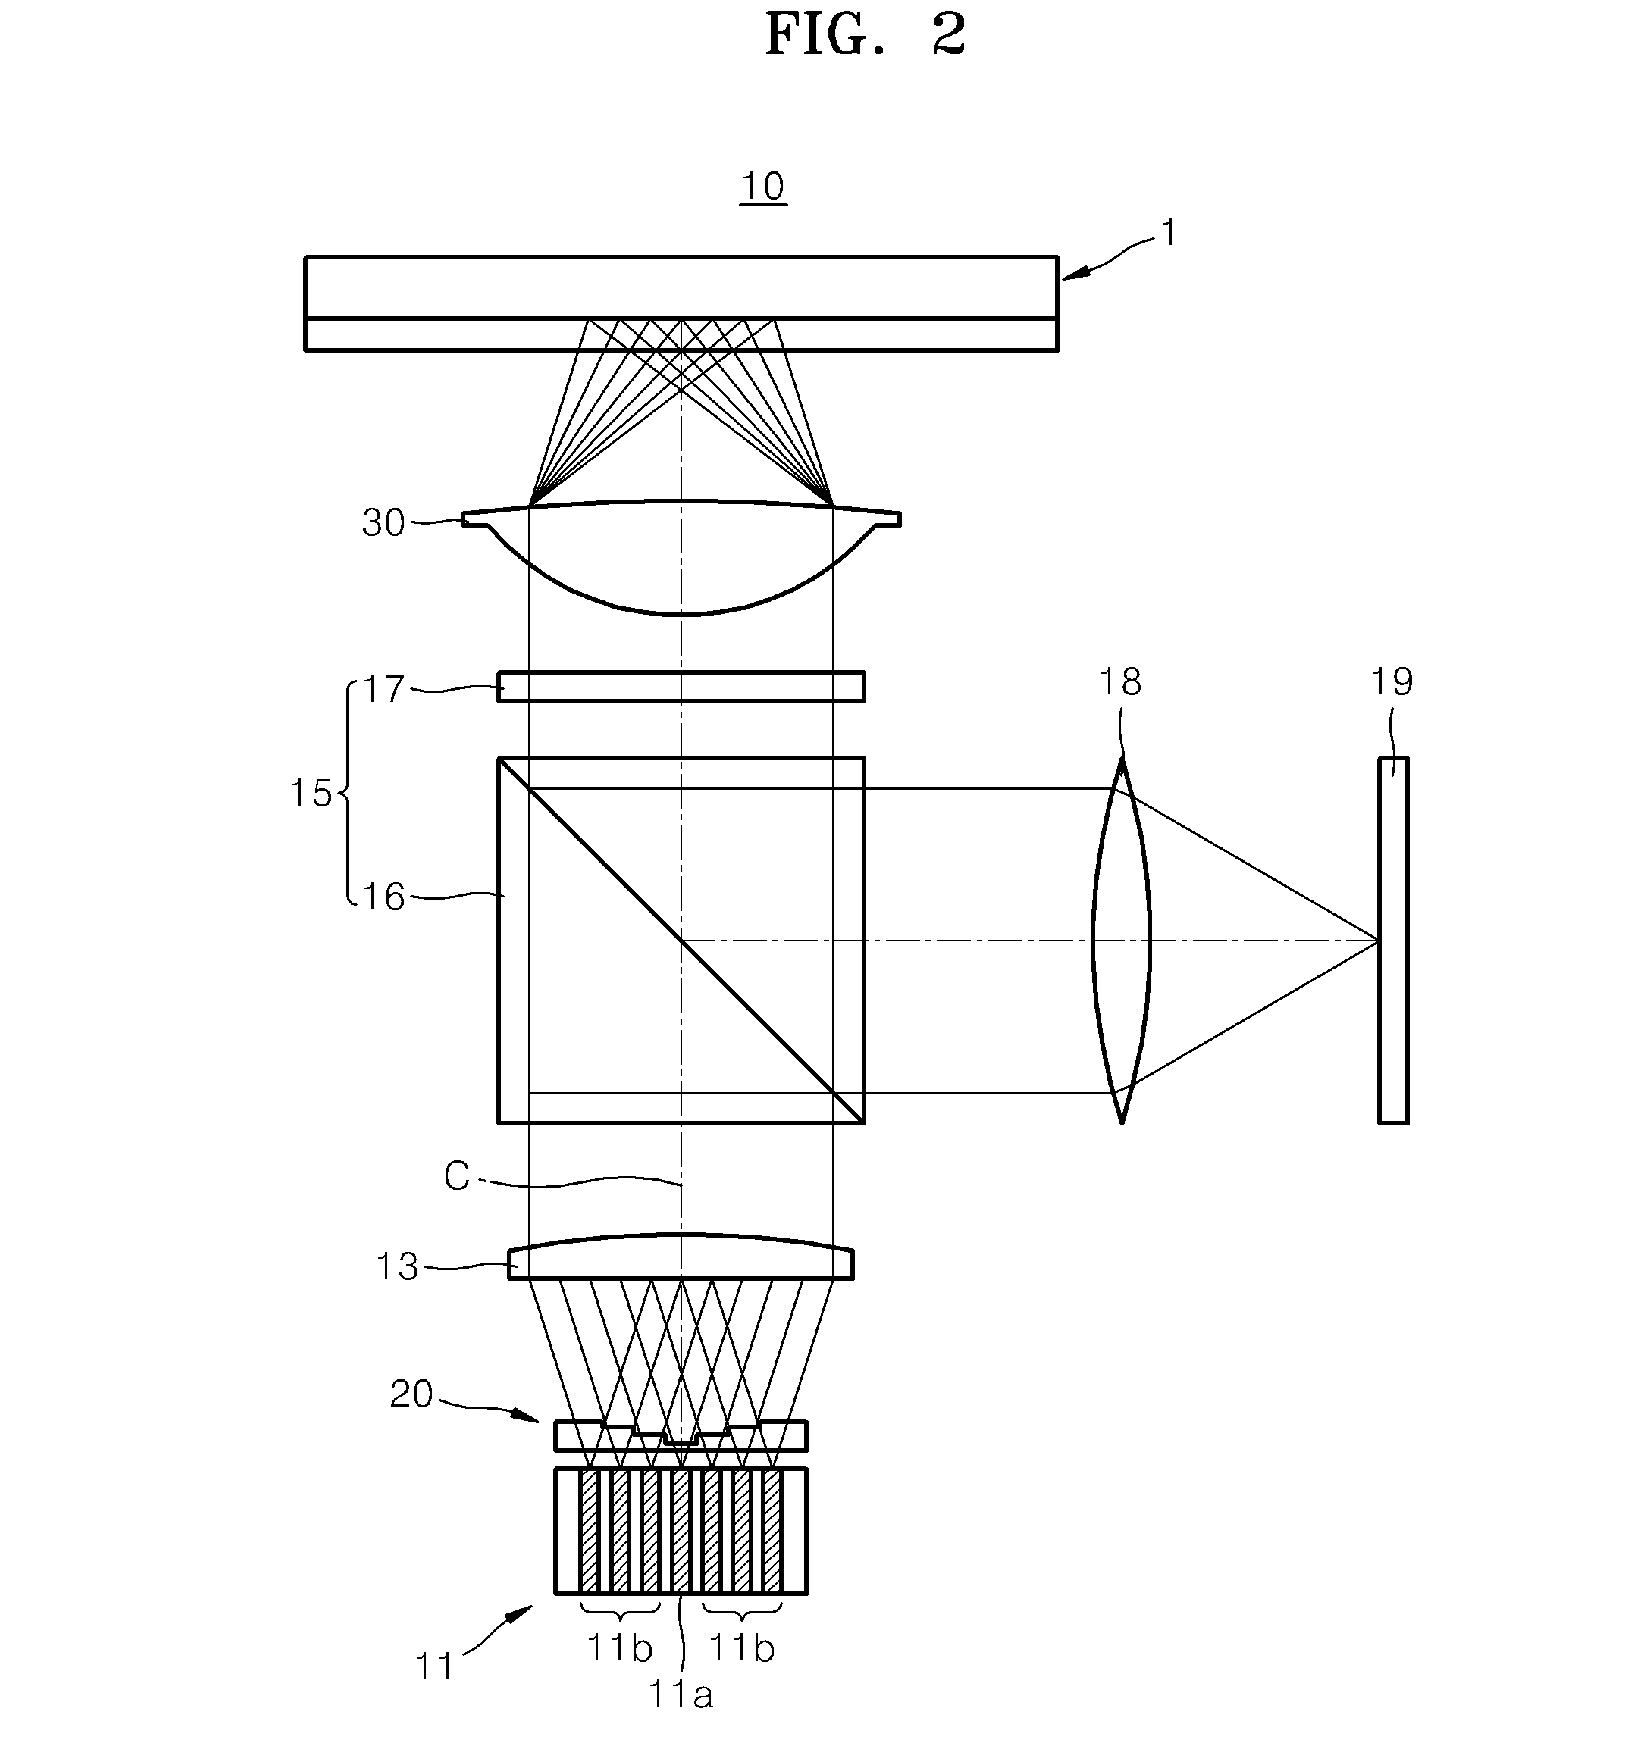 Multi-channel optical pickup and optical recording/reproducing apparatus employing the same